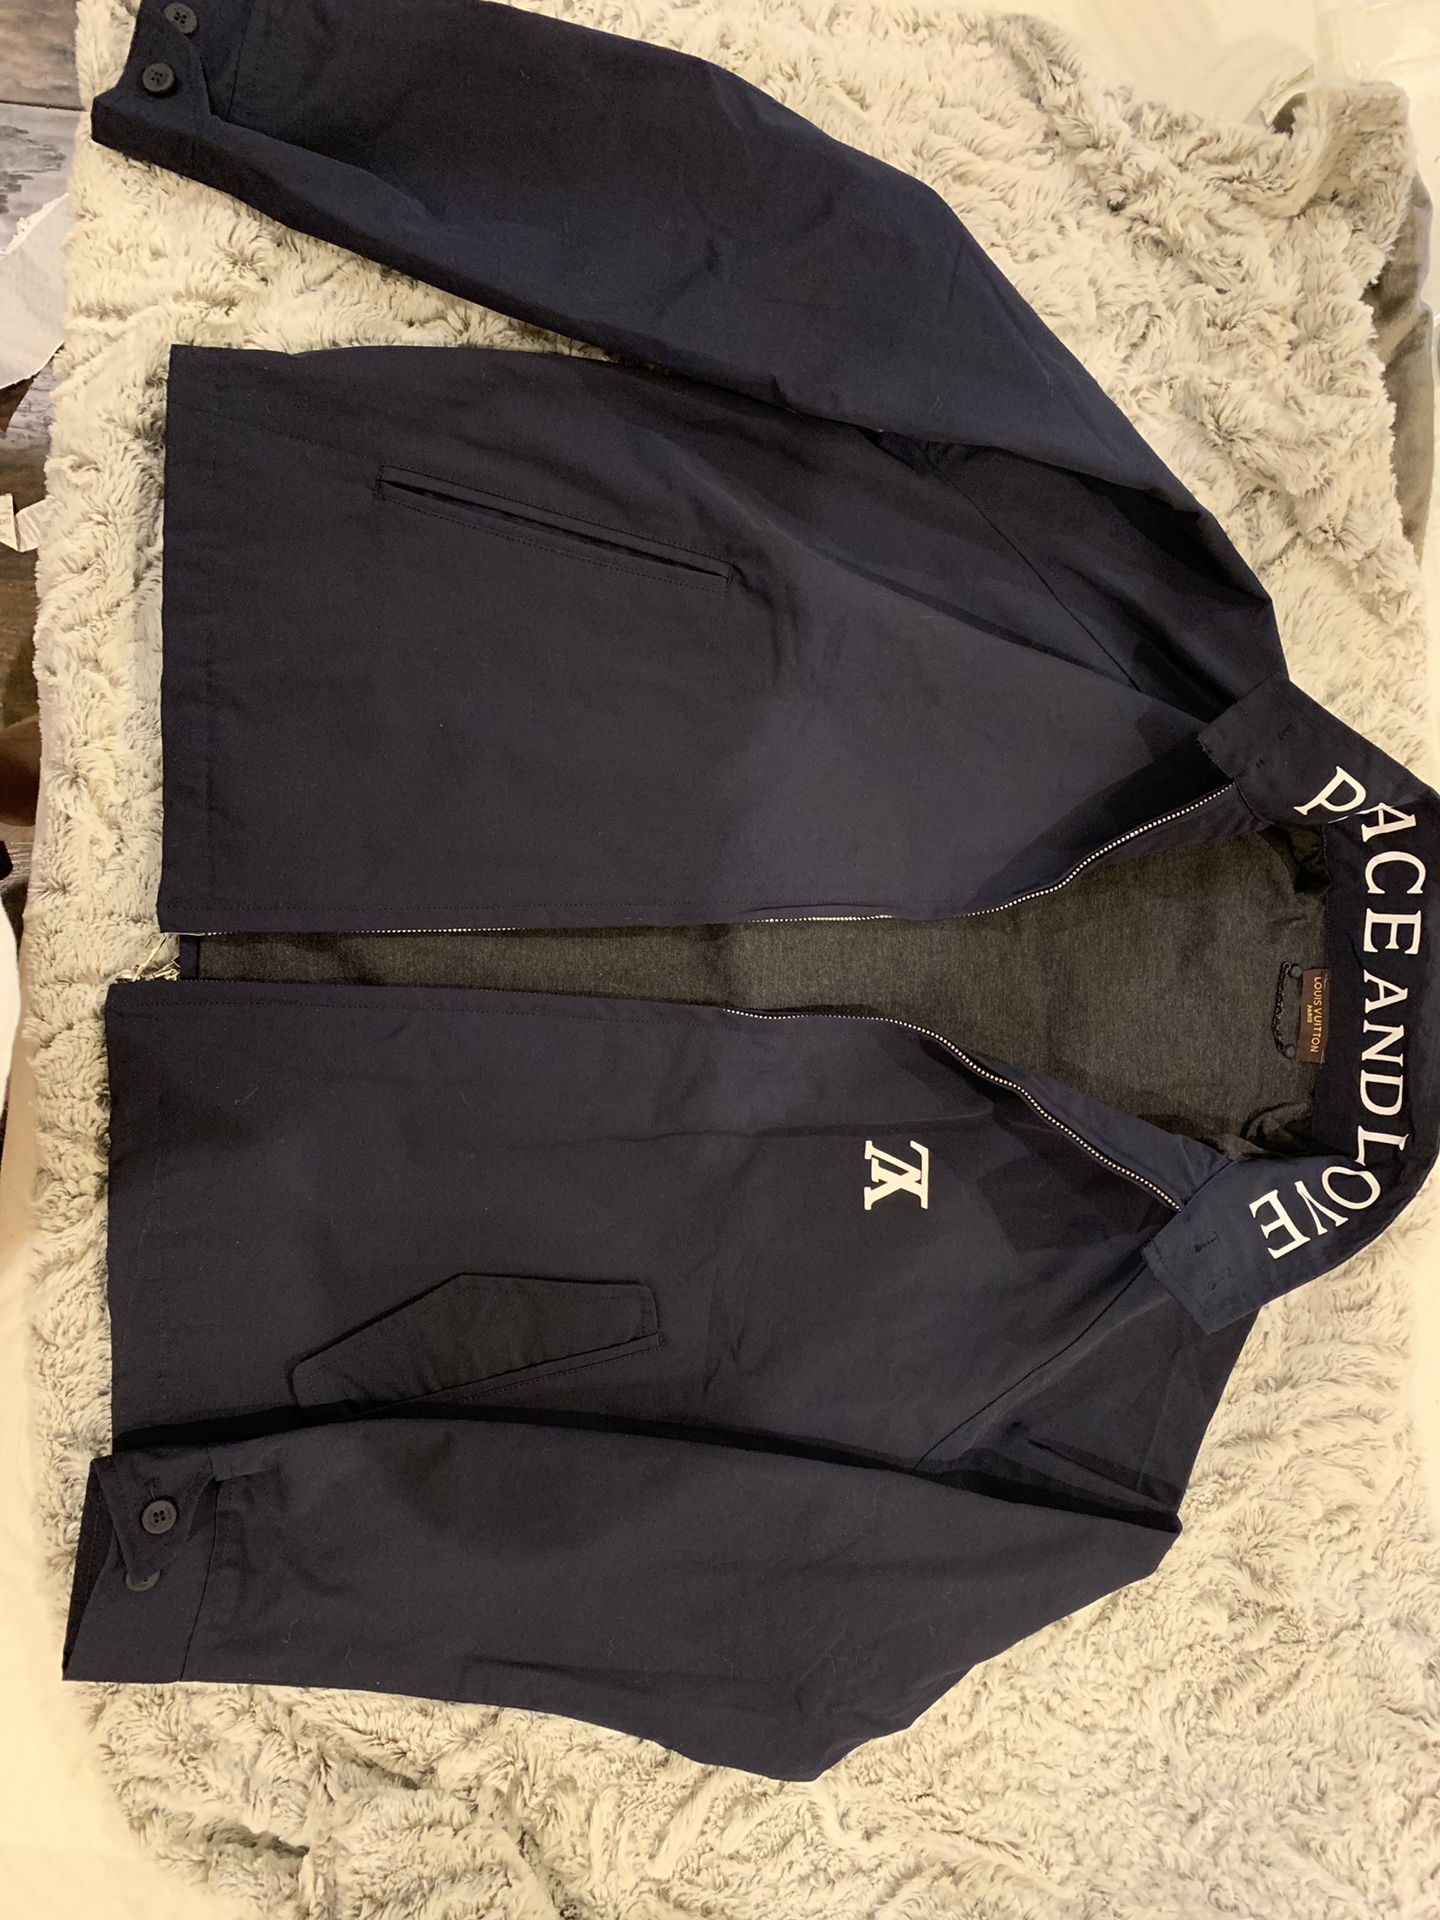 Louis Vuitton love and peace jacket retail 3000$ for Sale in Philadelphia,  PA - OfferUp